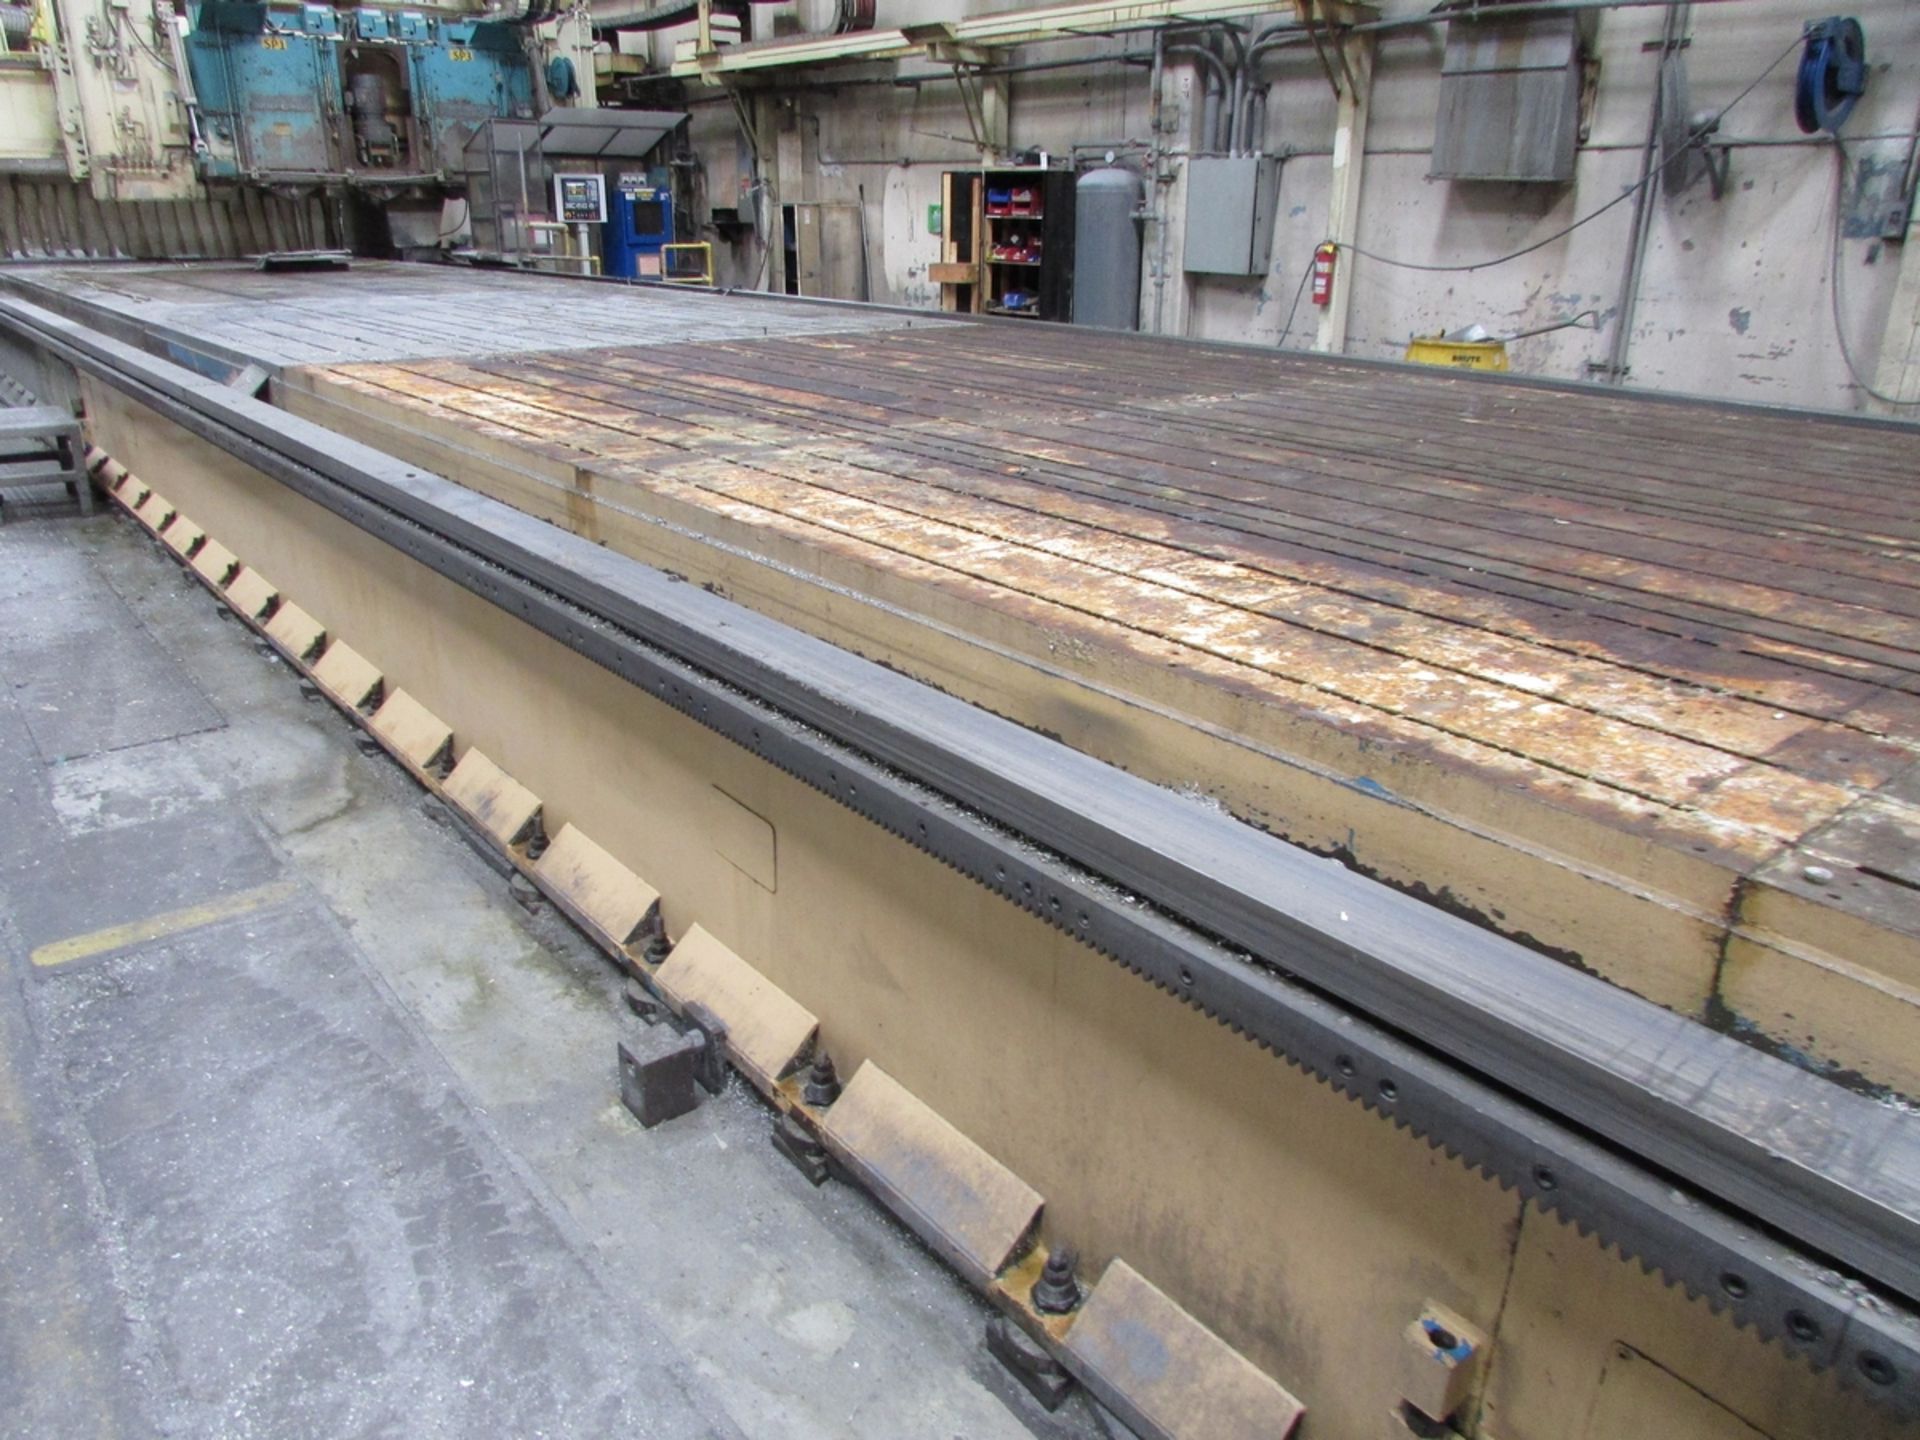 T-SLOTTED GANTRY MILL TABLE, 120' X 160", 125' BEDWAY LENGTH - Image 3 of 18